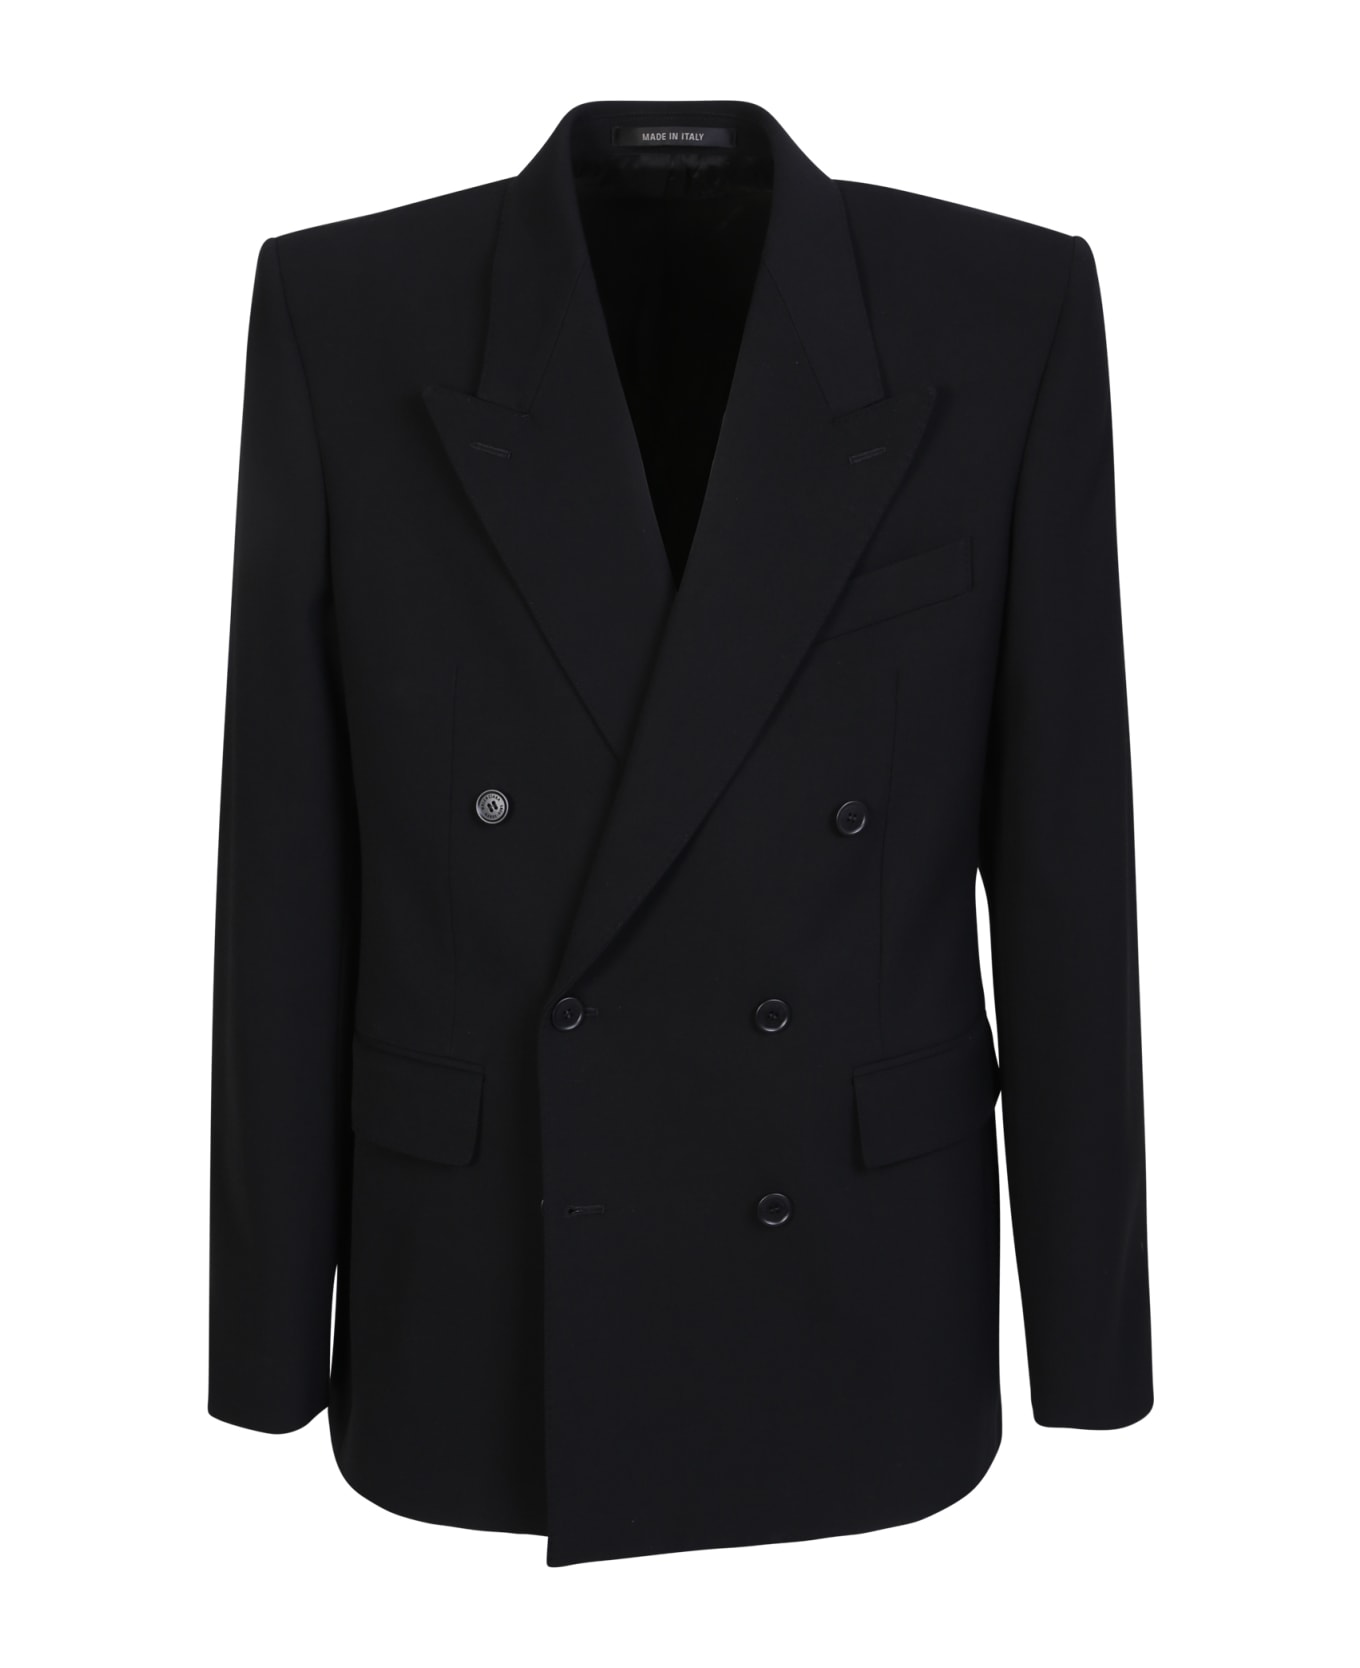 Balenciaga Double-breasted Blazer With Peaked Revers - Black